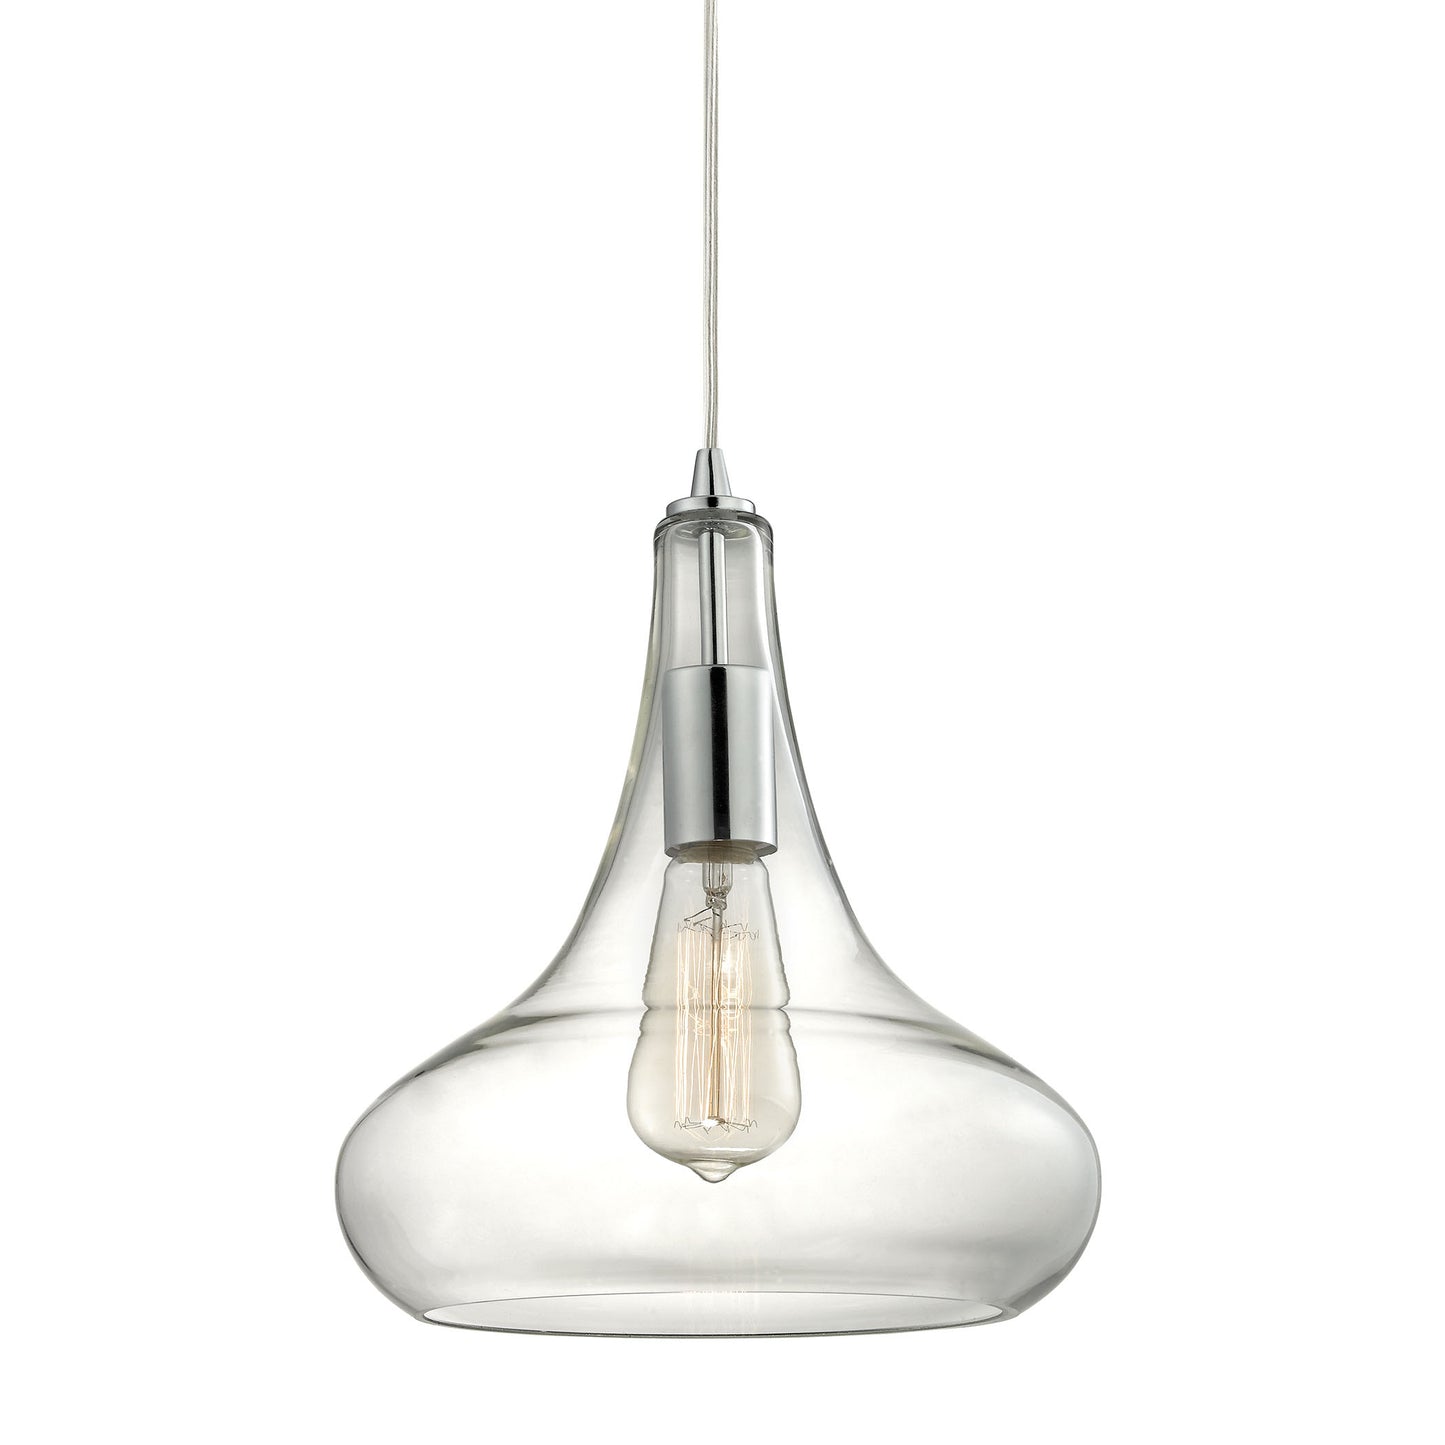 ELK Lighting 10422/1 - Orbital 10" Wide 1-Light Mini Pendant in Polished Chrome with Clear Glass